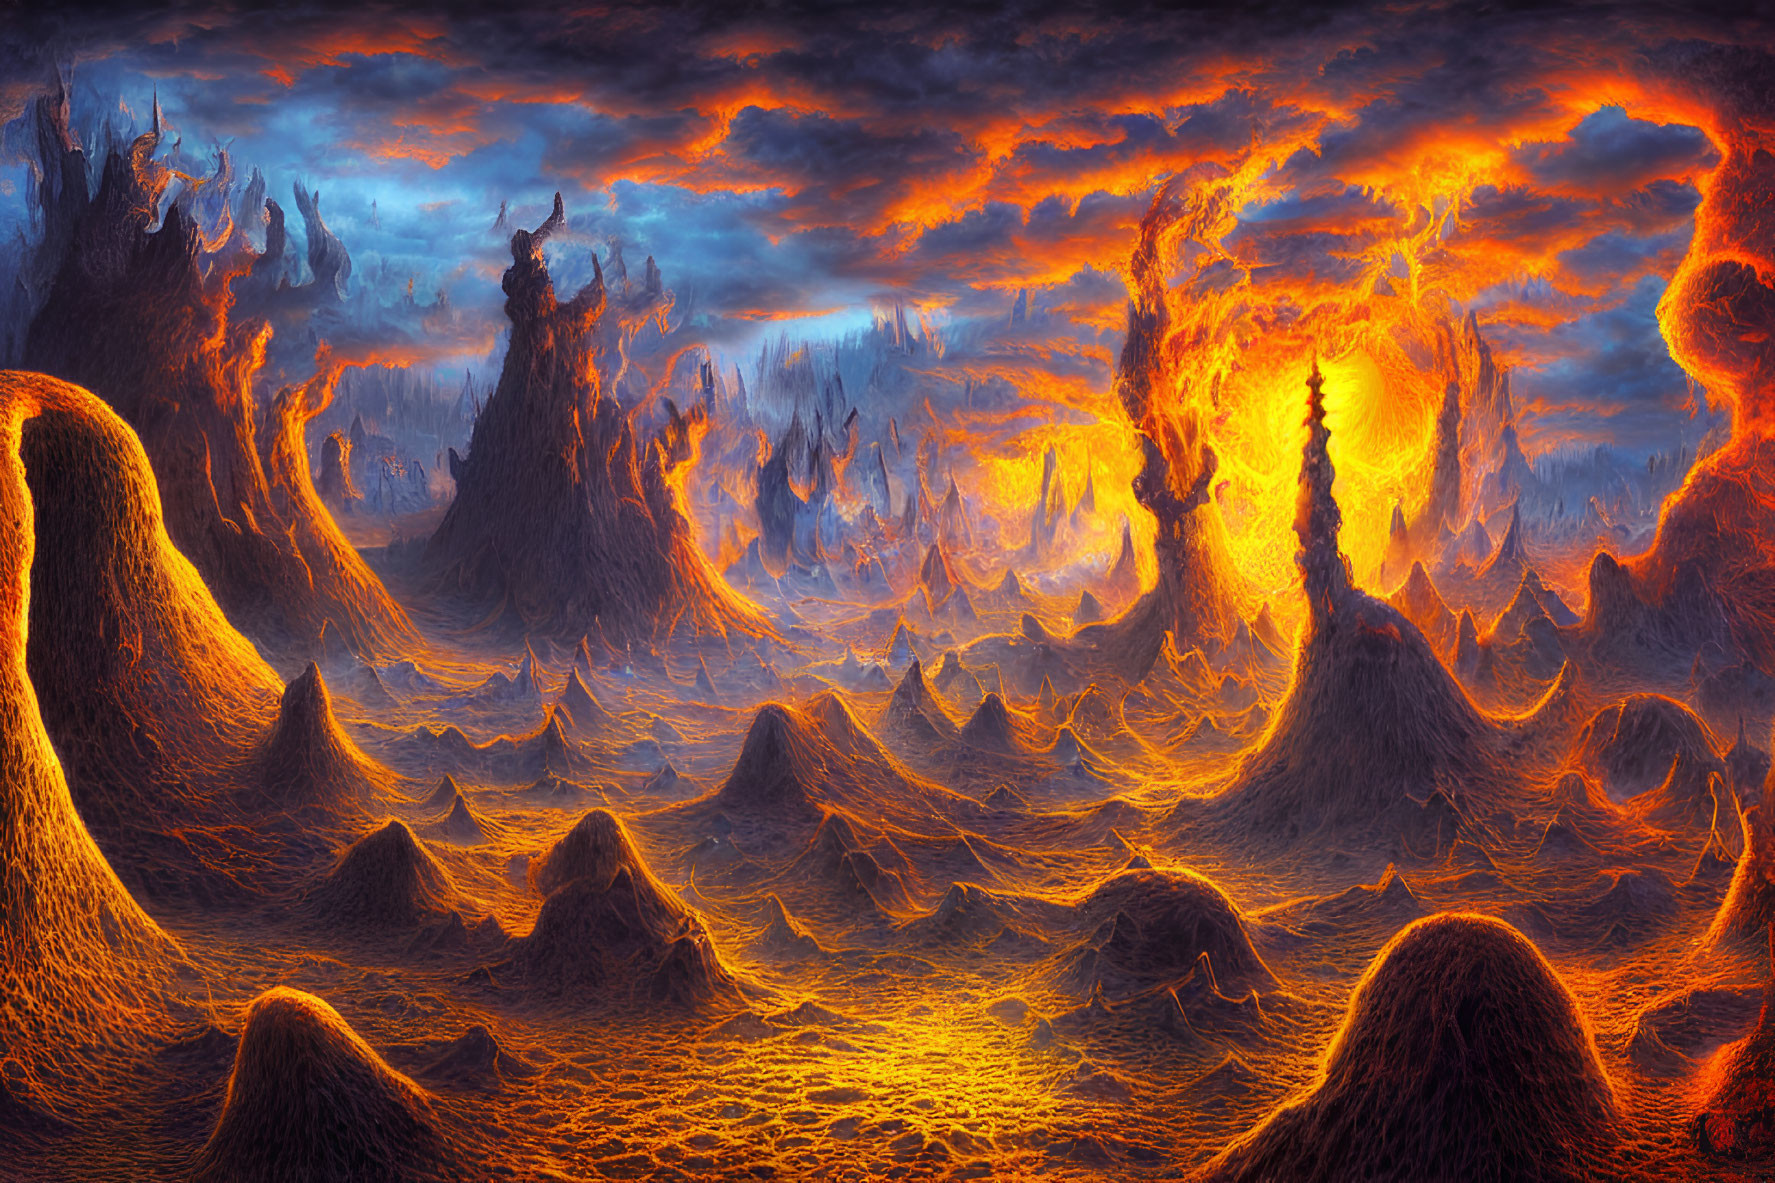 Dramatic volcanic landscape with molten lava and red-orange sky